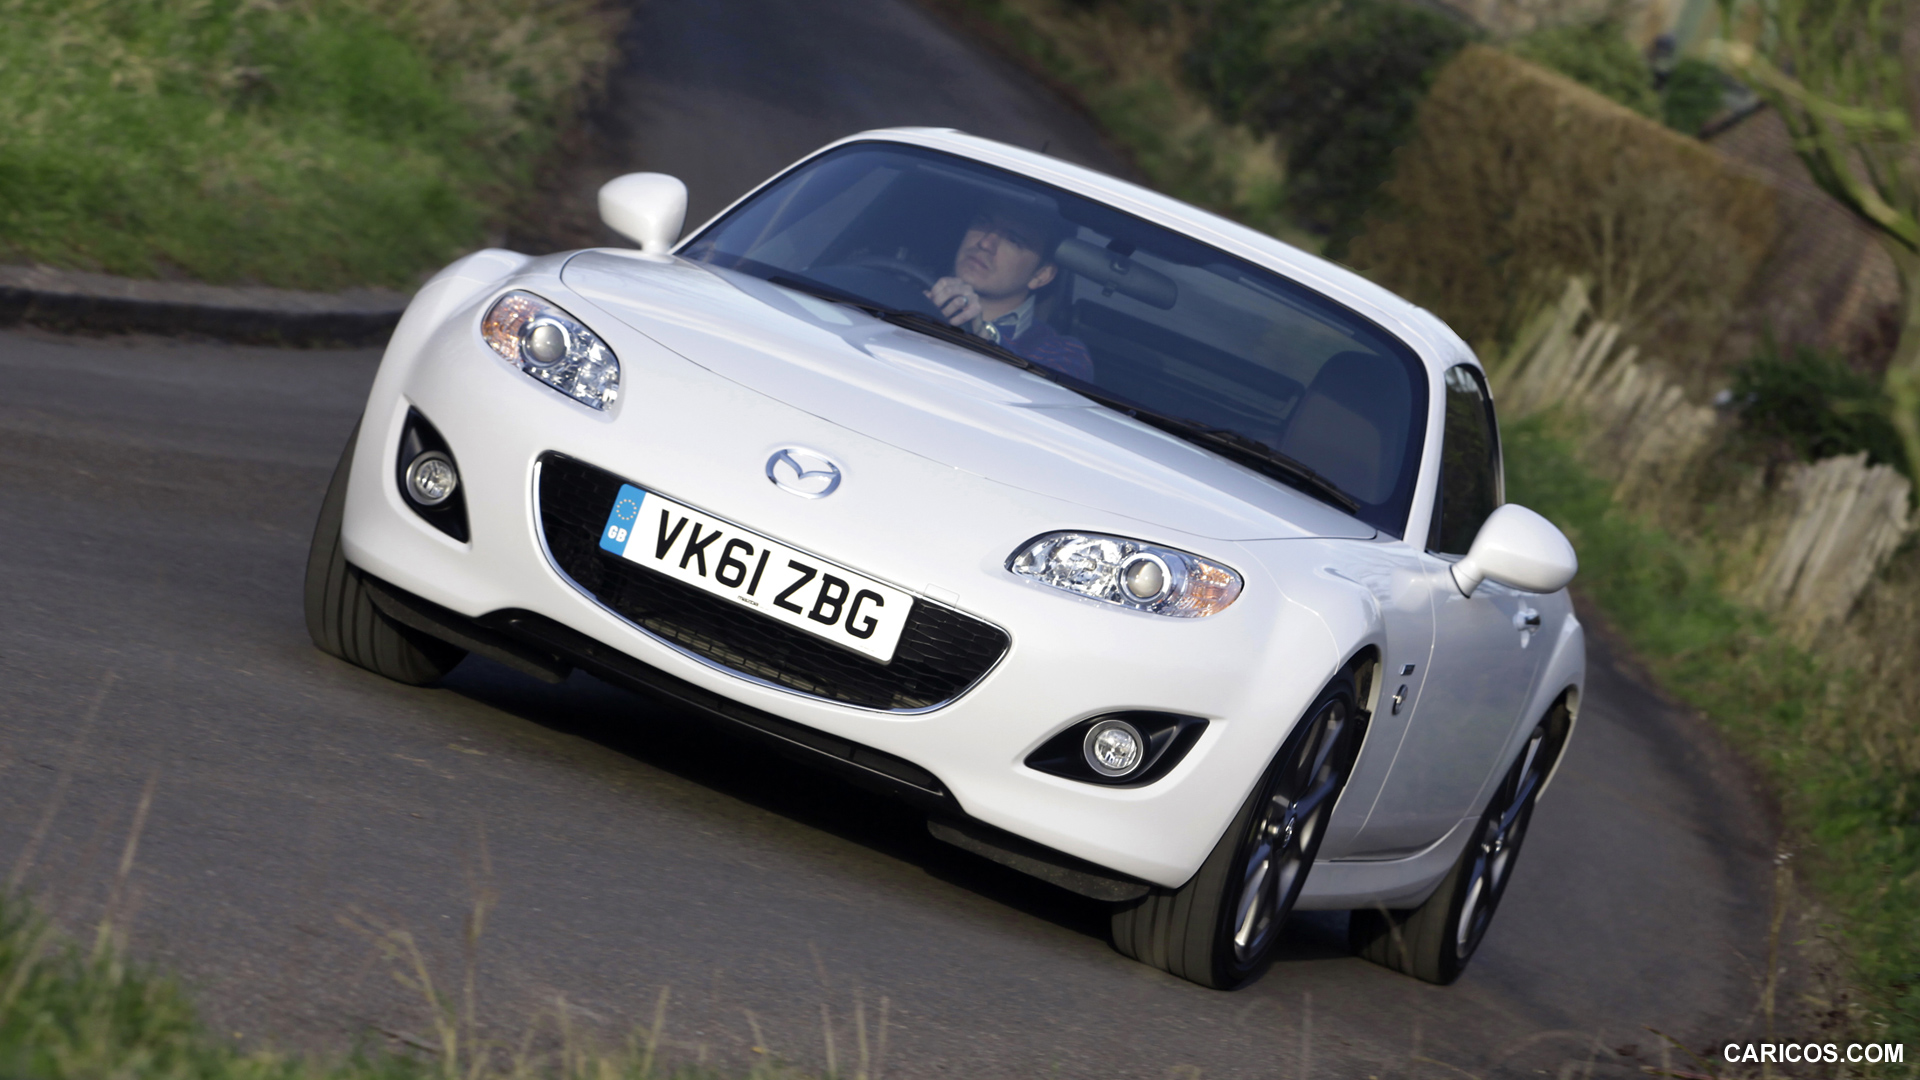 2012 Mazda MX-5 Venture Special Edition White - Front, #1 of 6